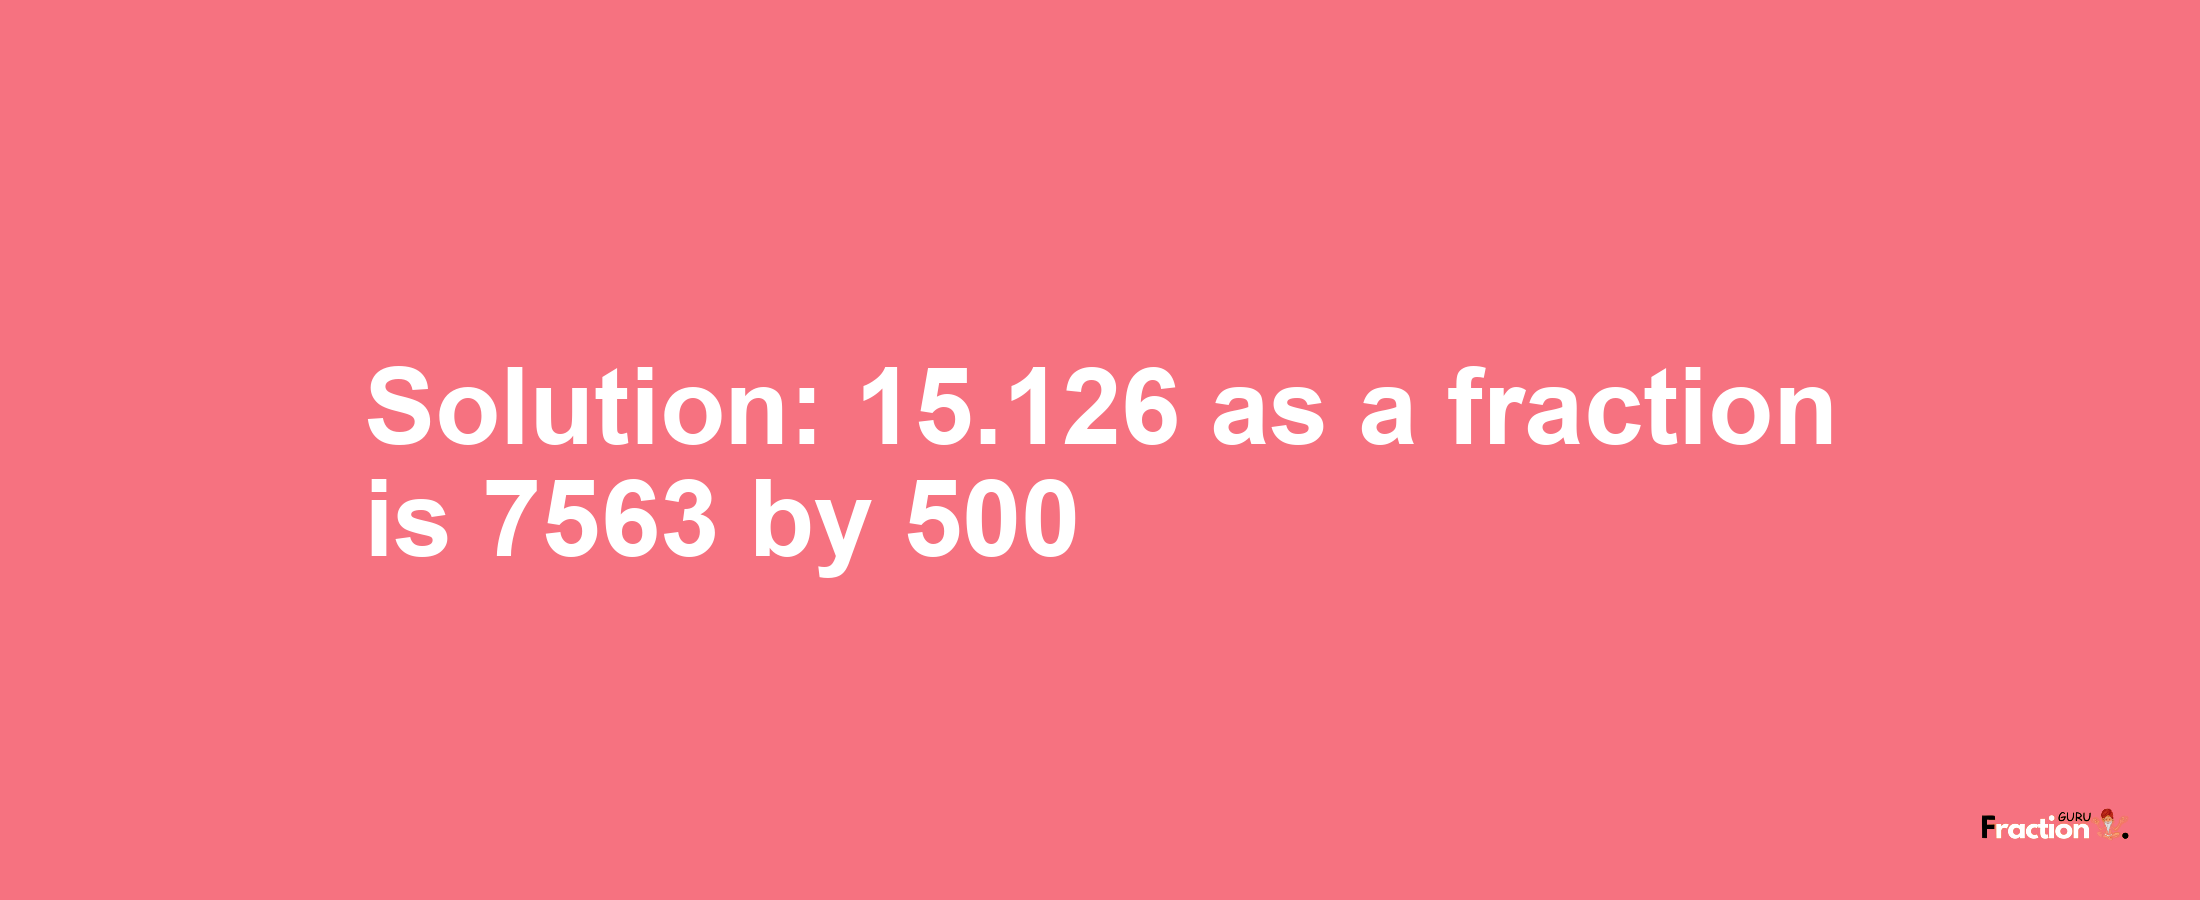 Solution:15.126 as a fraction is 7563/500